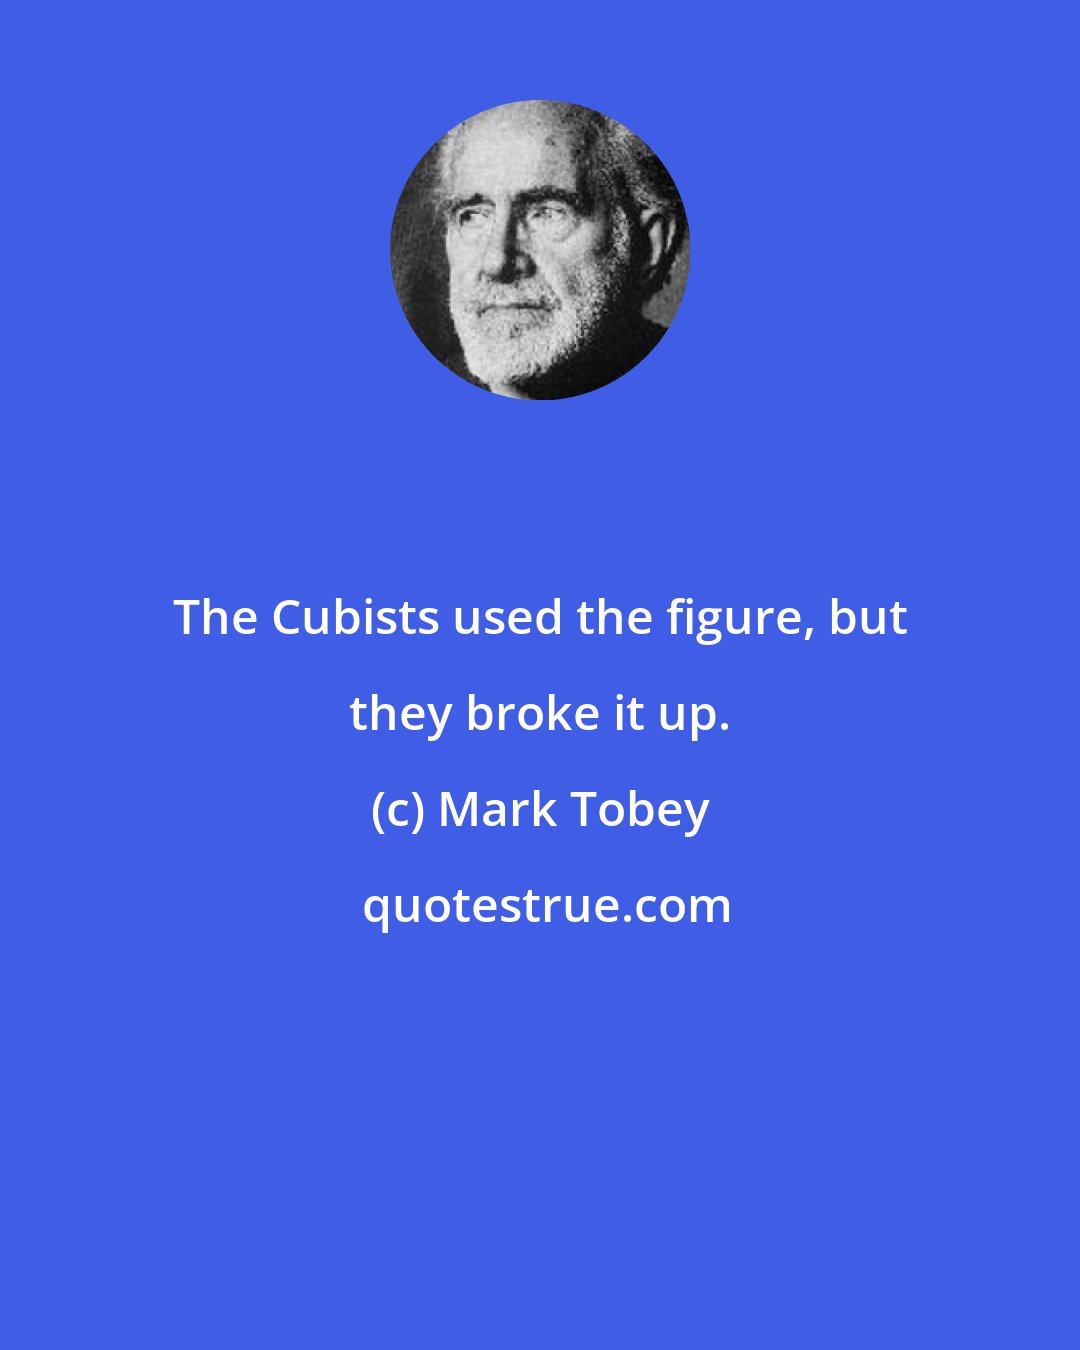 Mark Tobey: The Cubists used the figure, but they broke it up.